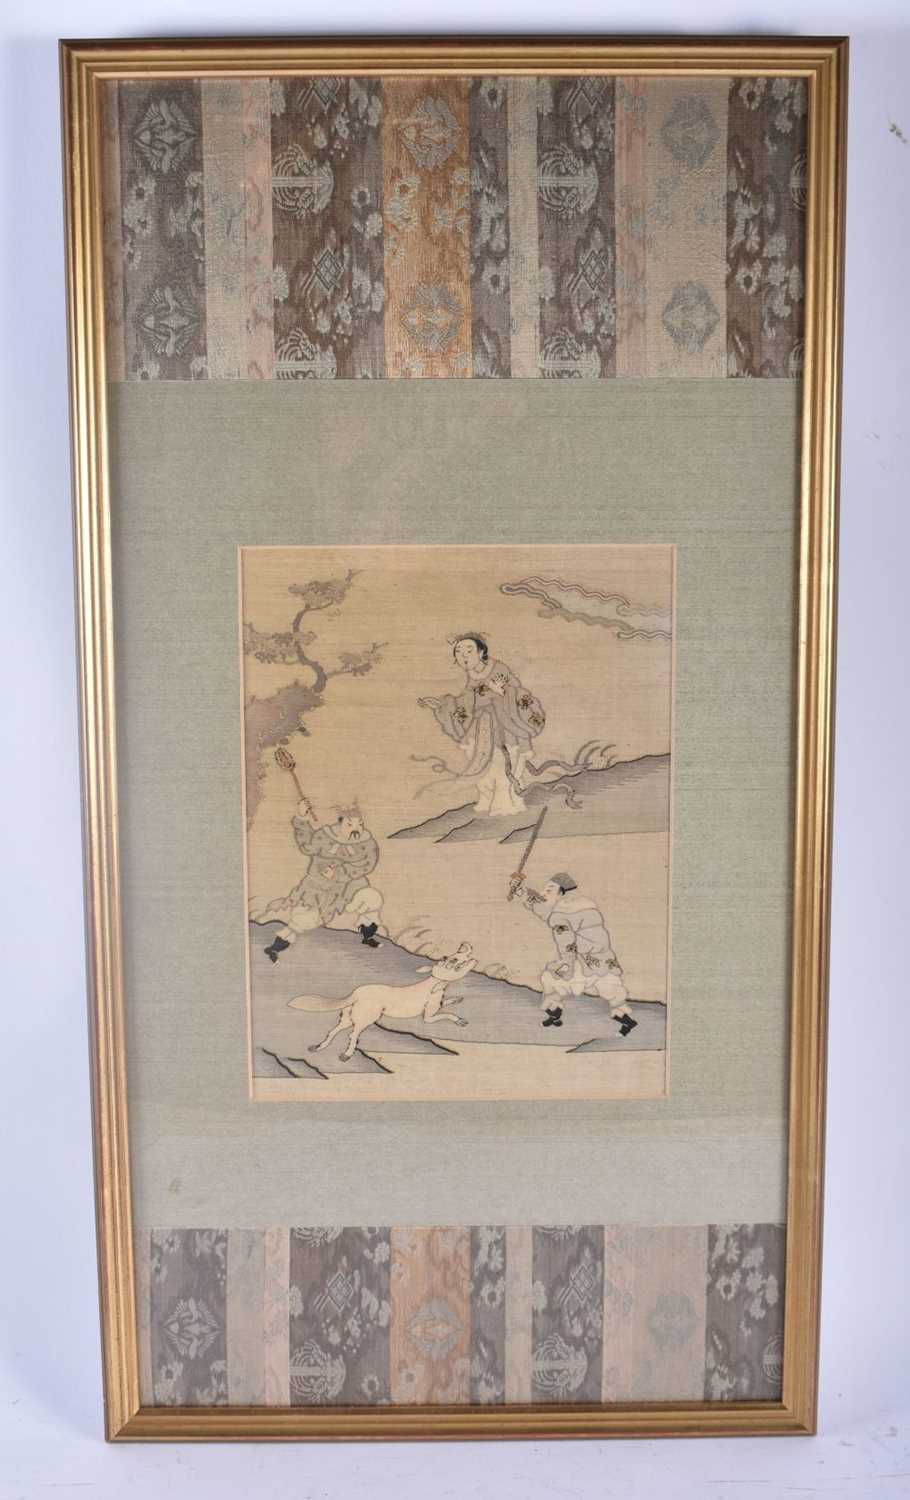 AN 18TH/19TH CENTURY CHINESE KESI SILK EMBROIDERED PANEL Qing, depicting three figures and an animal